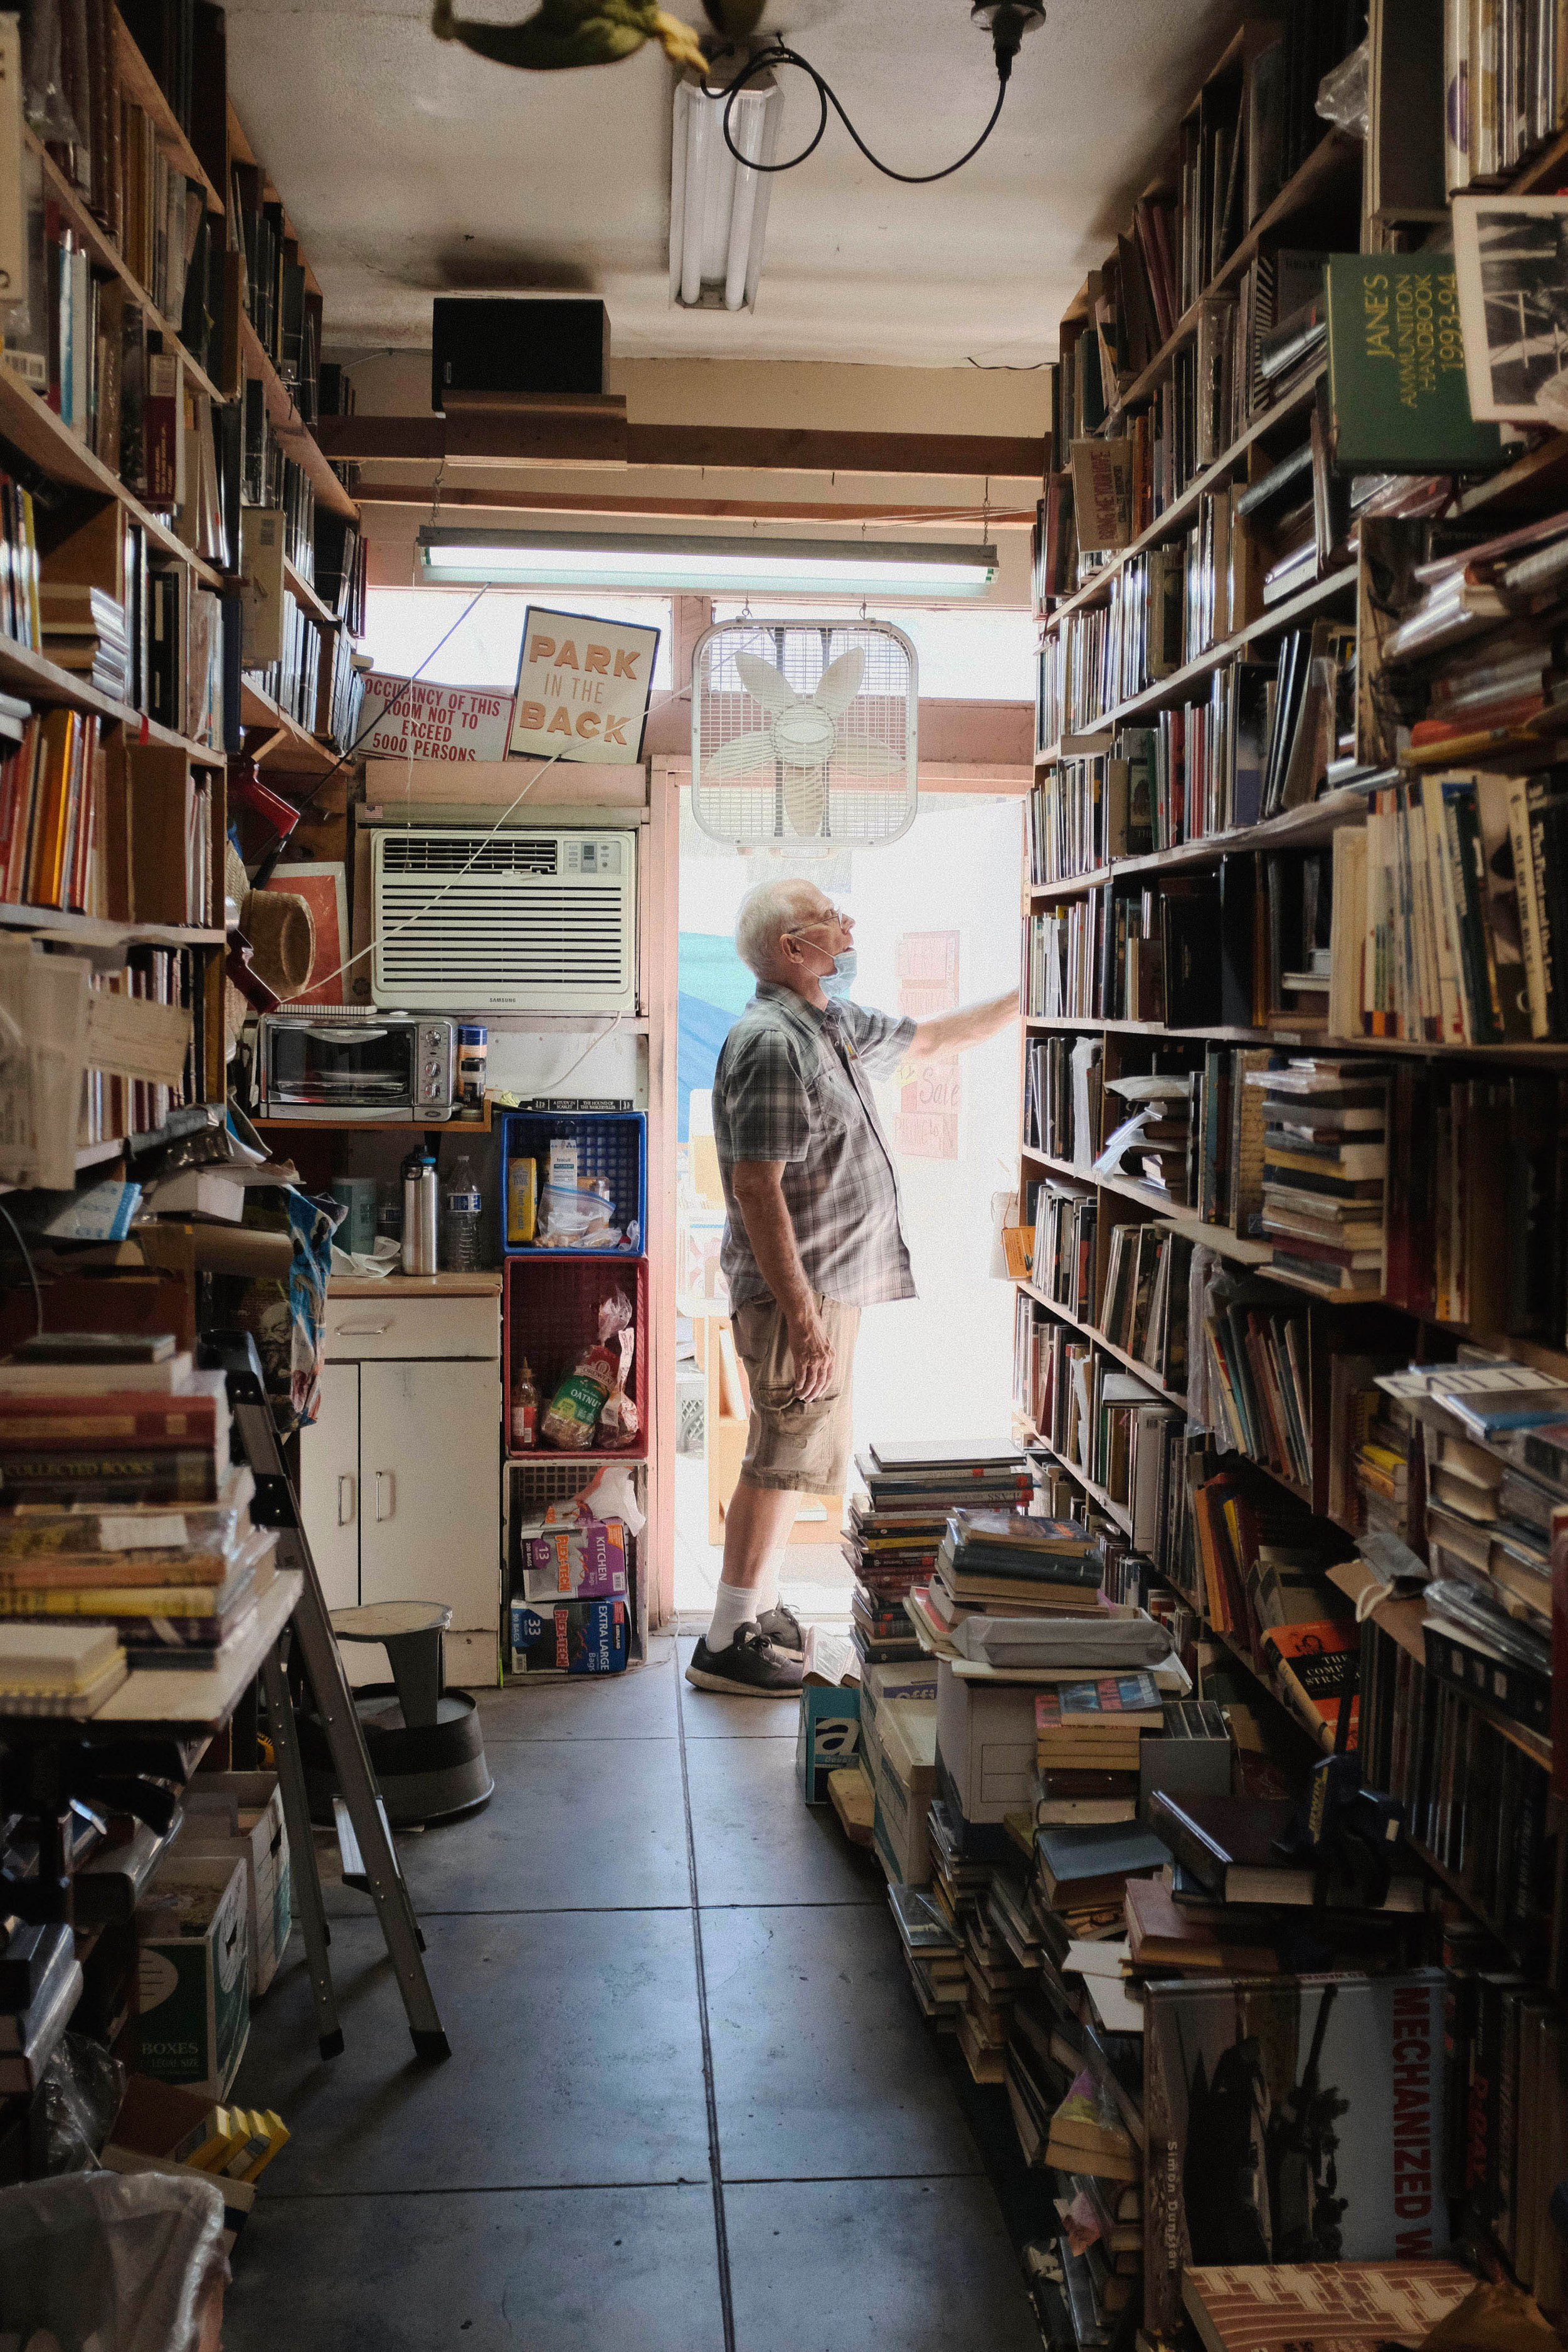  Bill Wirt walks to the back of the store, in search of a book that a customer has inquired about. Wurt first searches for a book, before asking his neice to check the stockroom. Bargain Books in Van Nuys, California. September 3, 2021 (Anna Sophia M